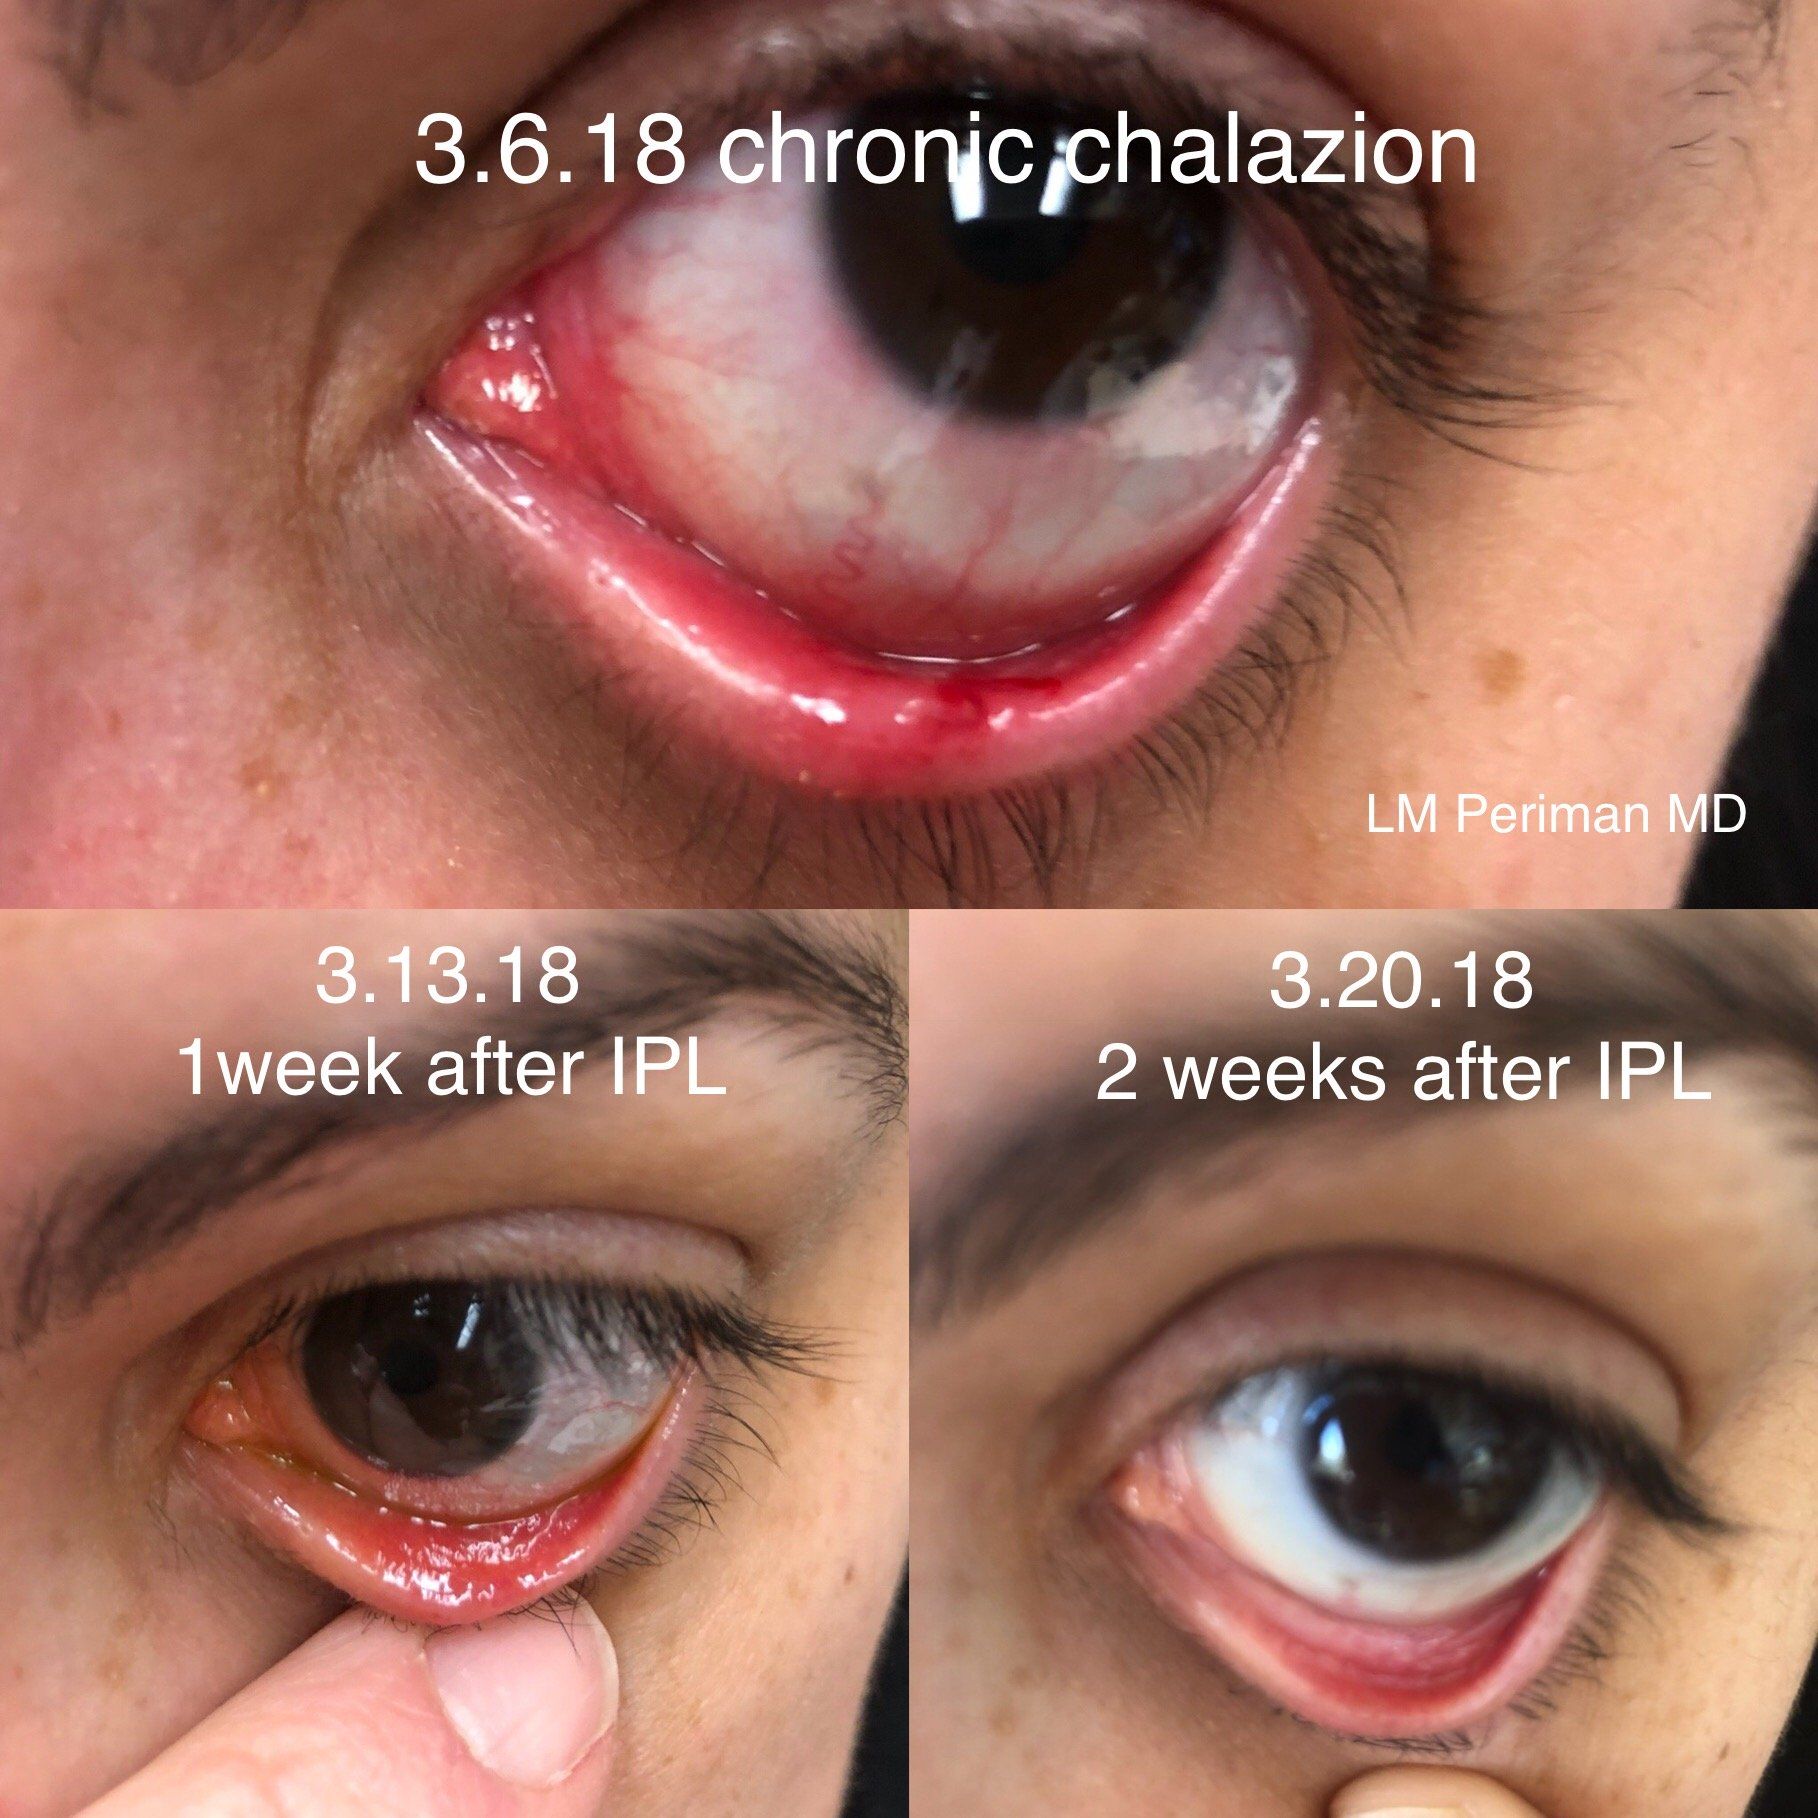 Treating Chalazion With Ipl Therapy